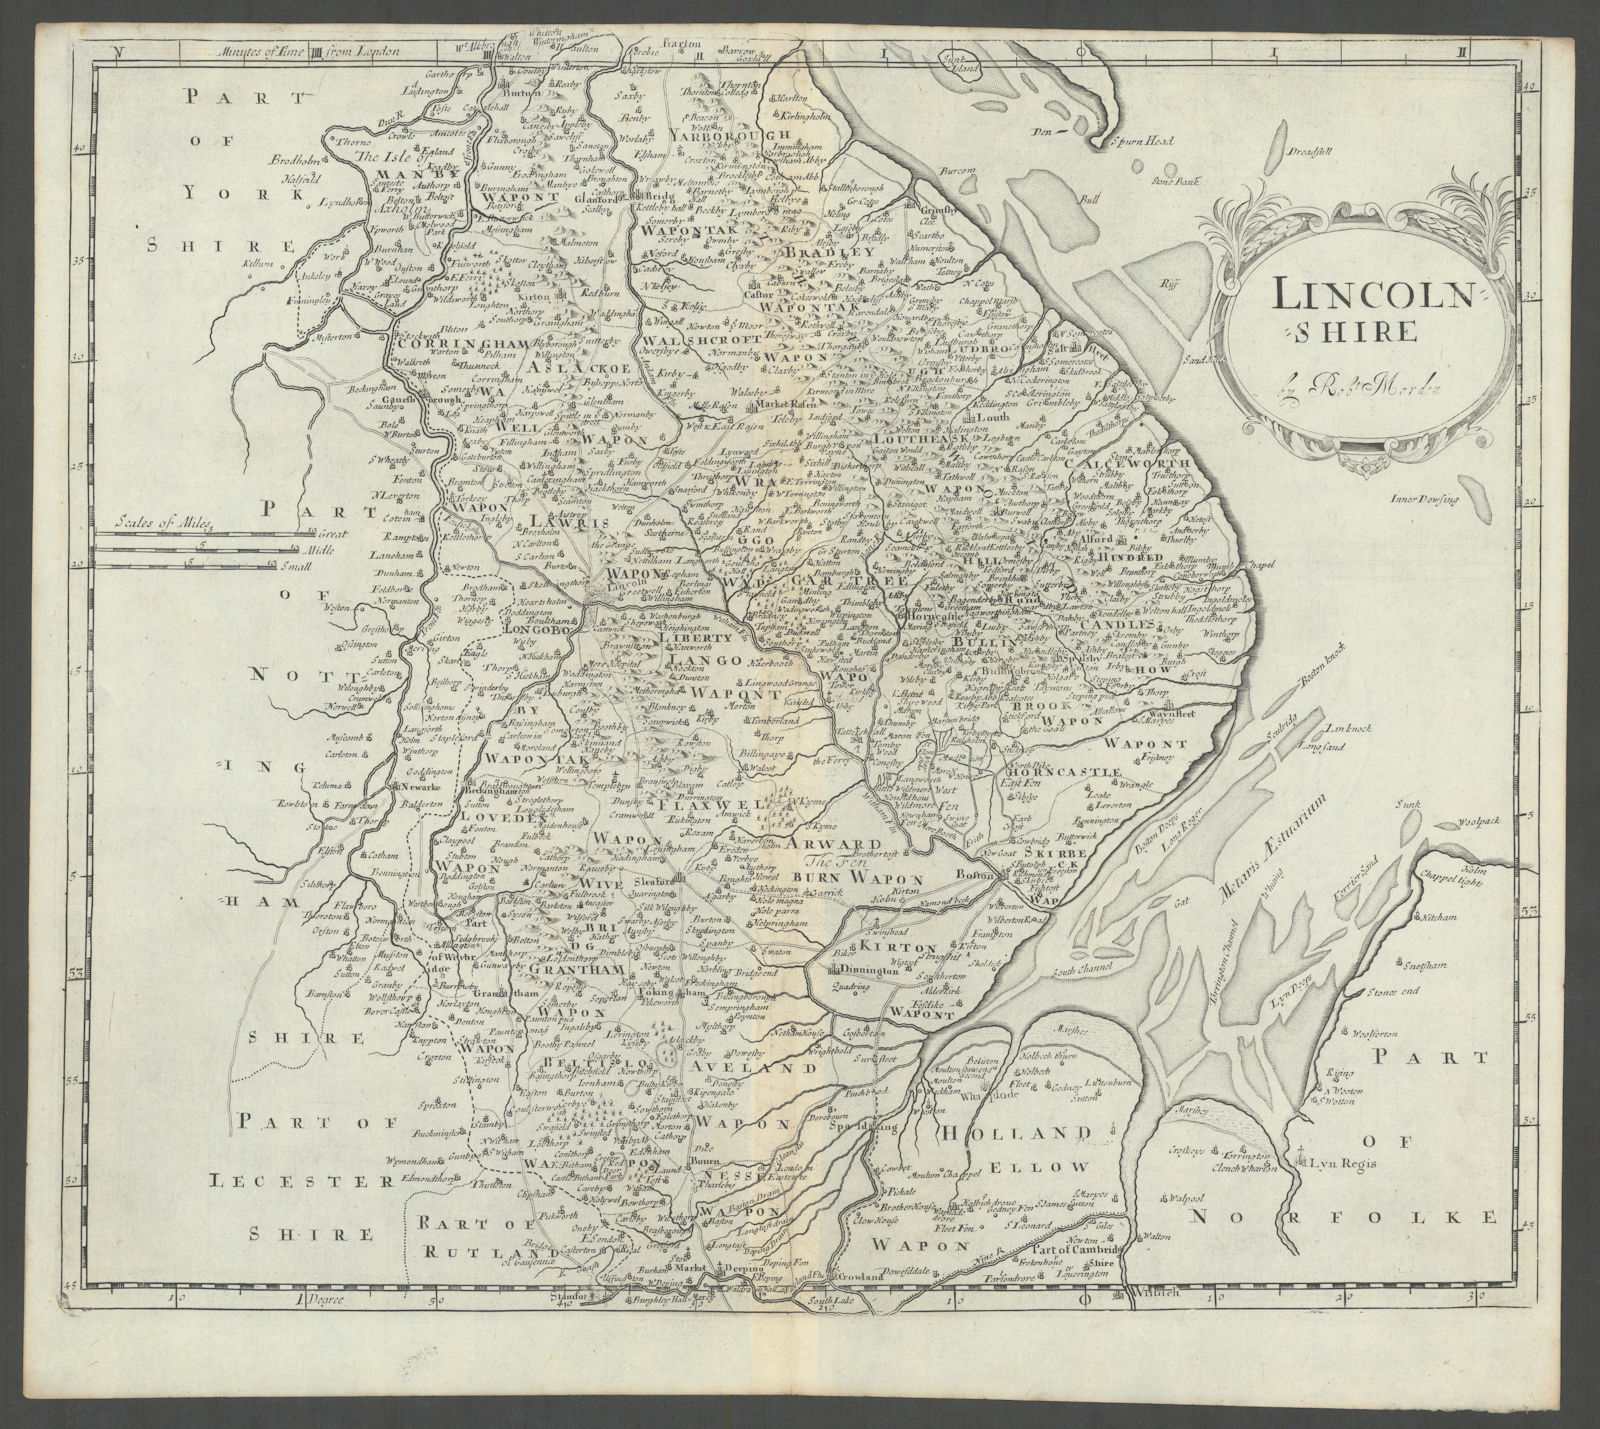 Lincolnshire. 'LINCOLN SHIRE' by ROBERT MORDEN from Camden's Britannia 1722 map